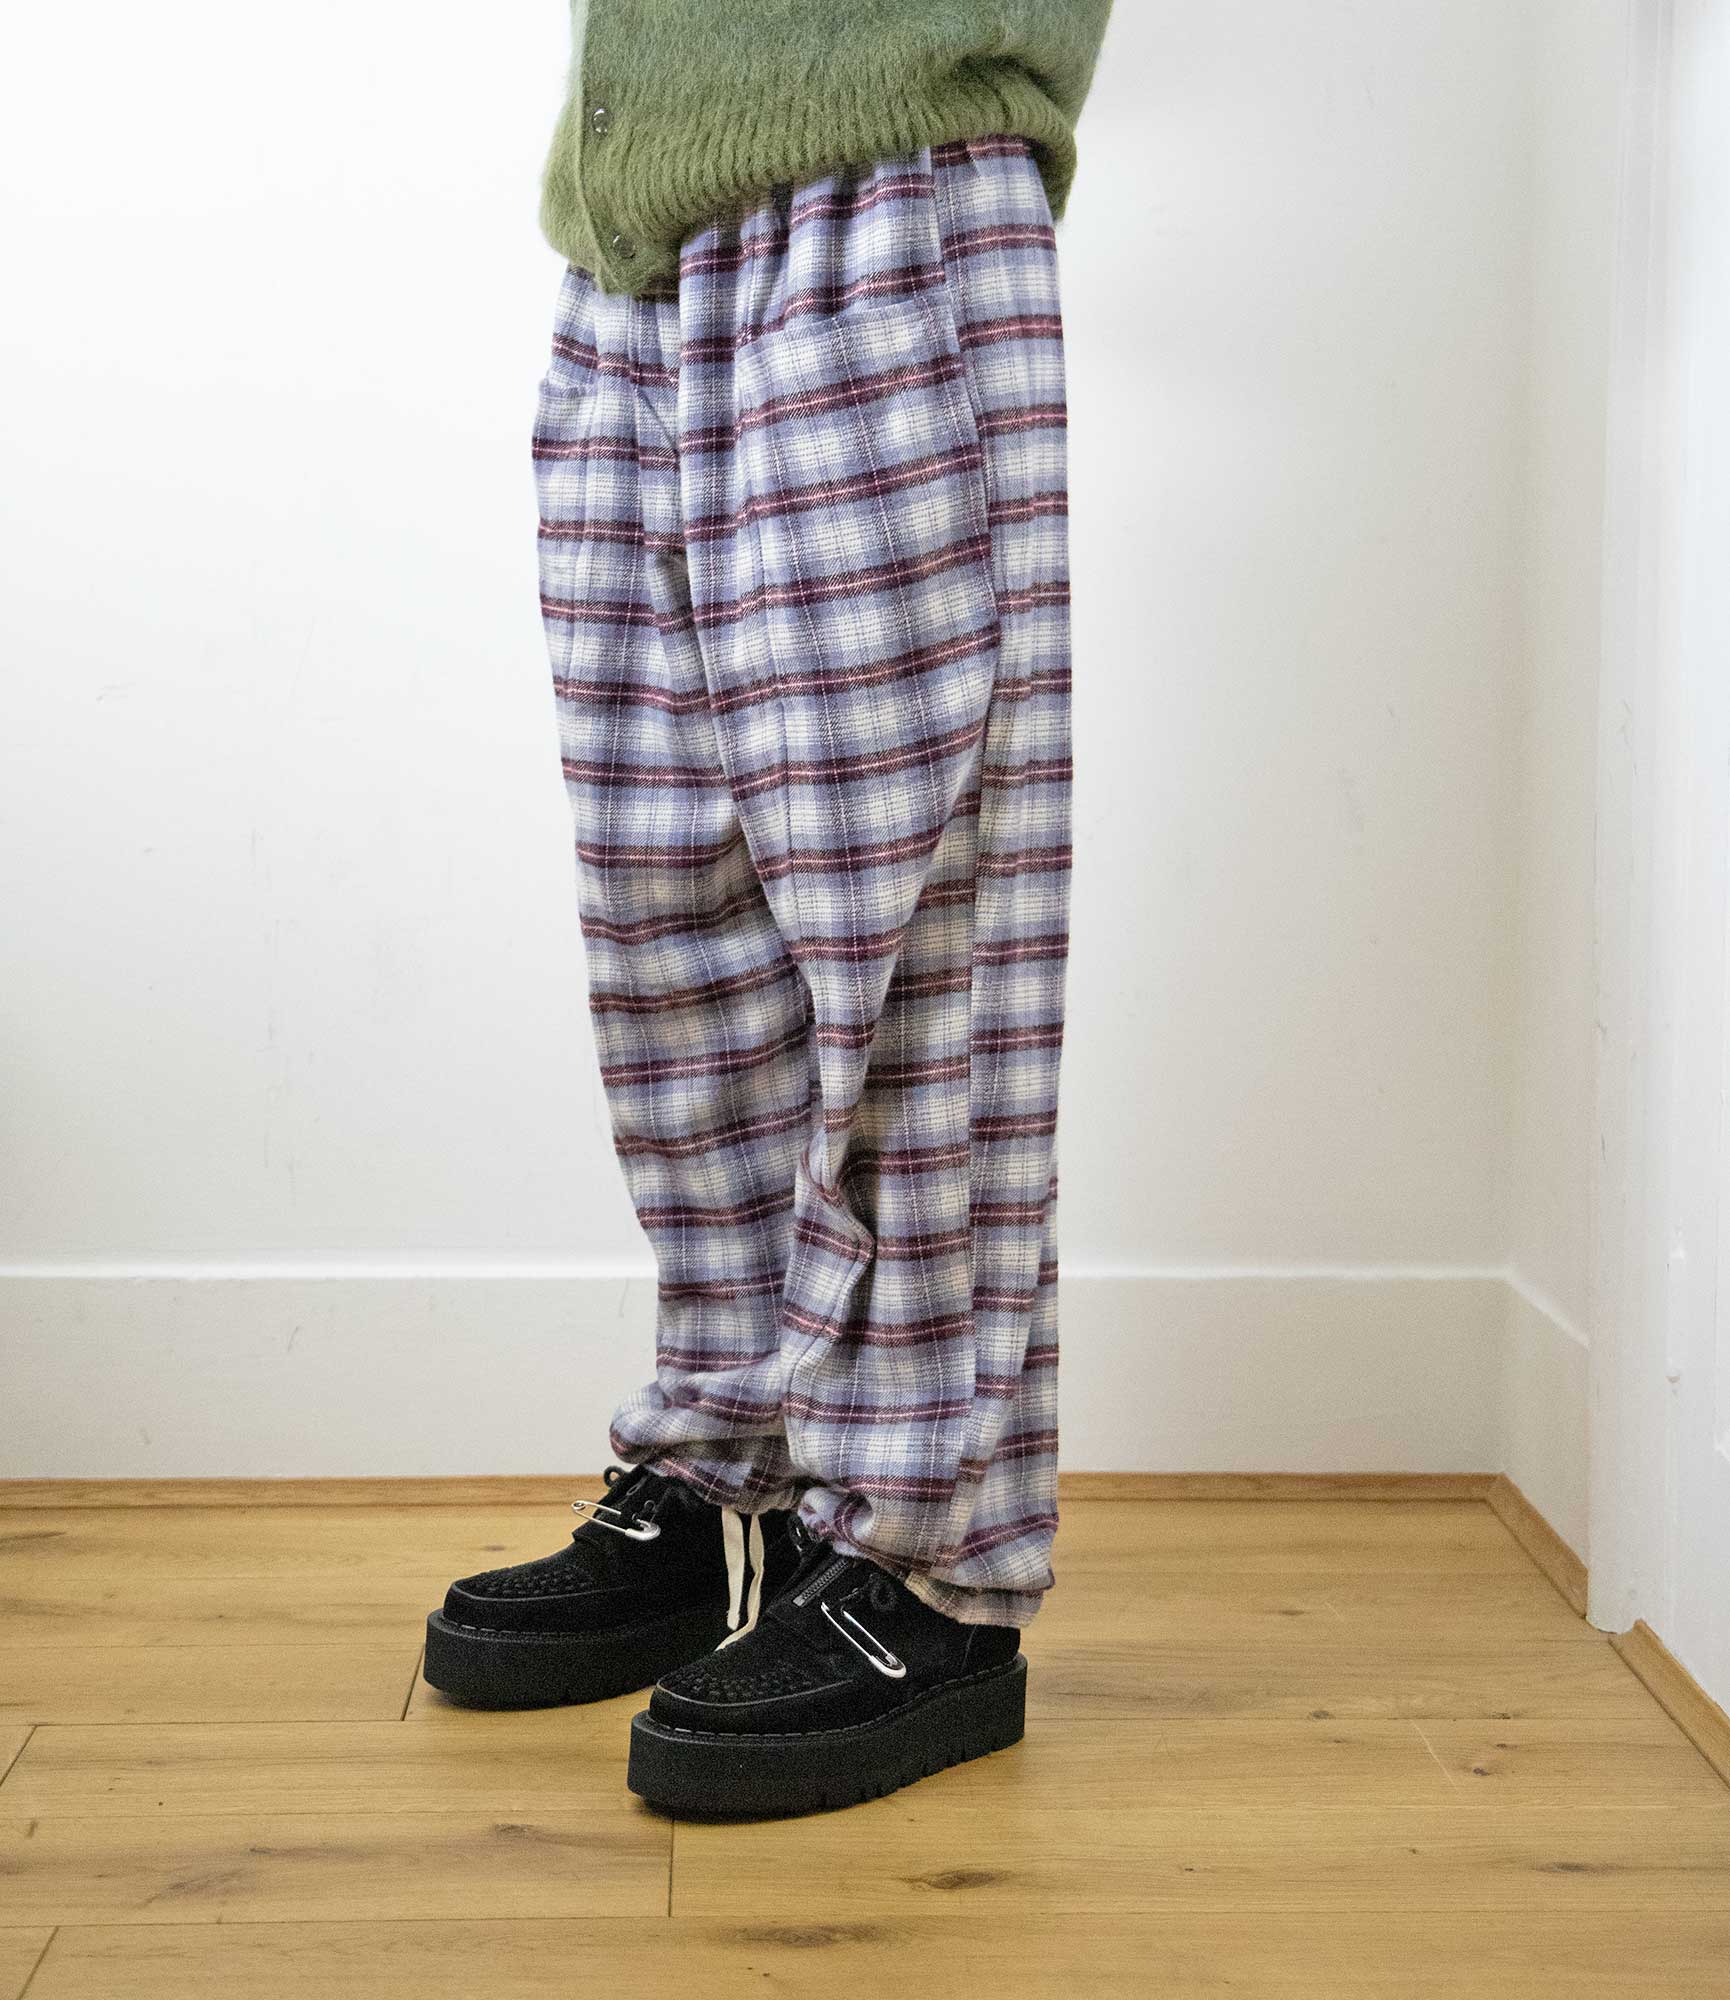 South2 West8 Army String Pant - Flannel Twill / Plaid - Lavender/Bordeaux